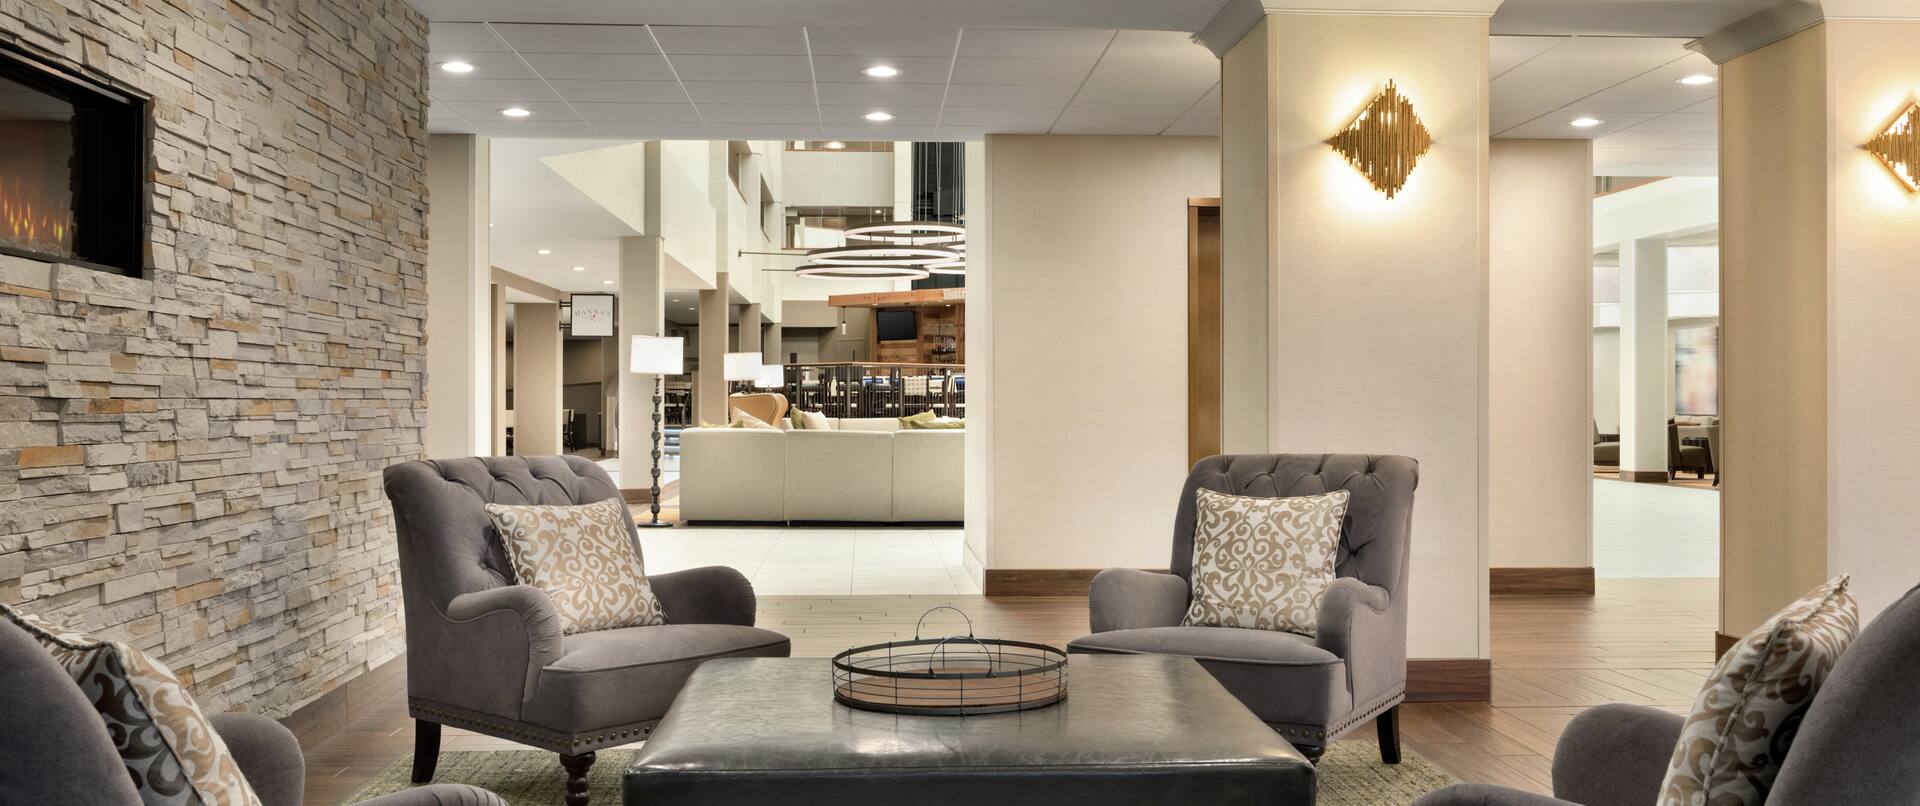 Chairs Around a Coffee Table in Lobby Sitting Area